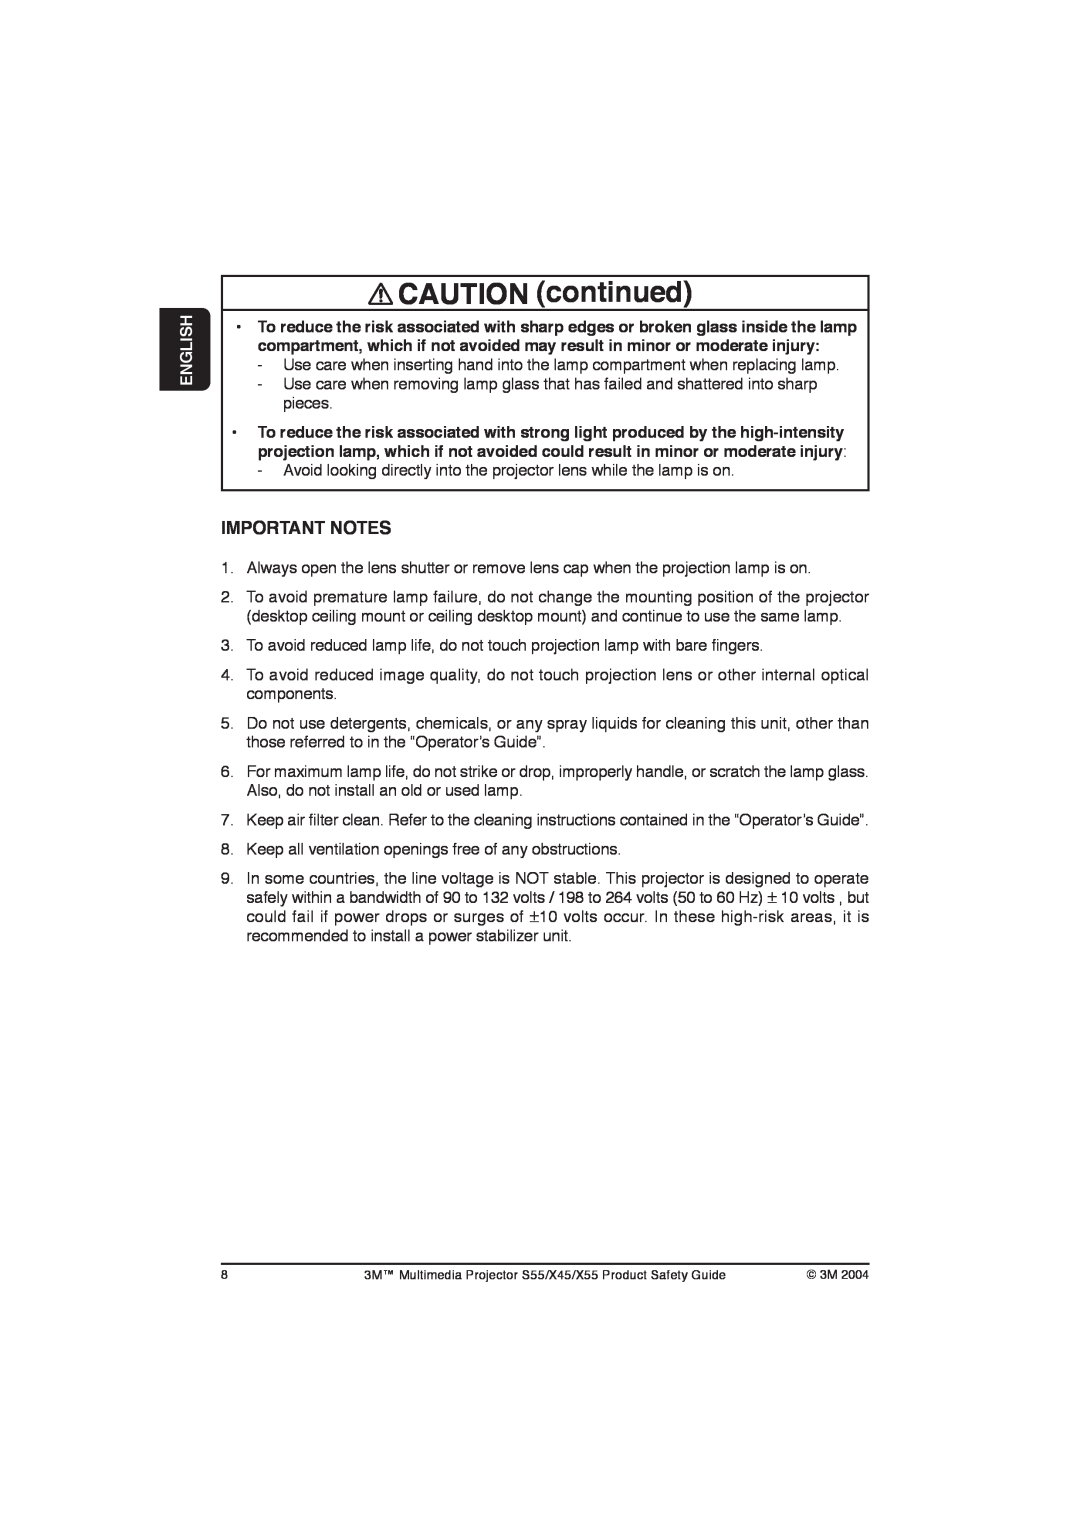 3M X55, X45, S55 manual CAUTION continued, Important Notes, English 